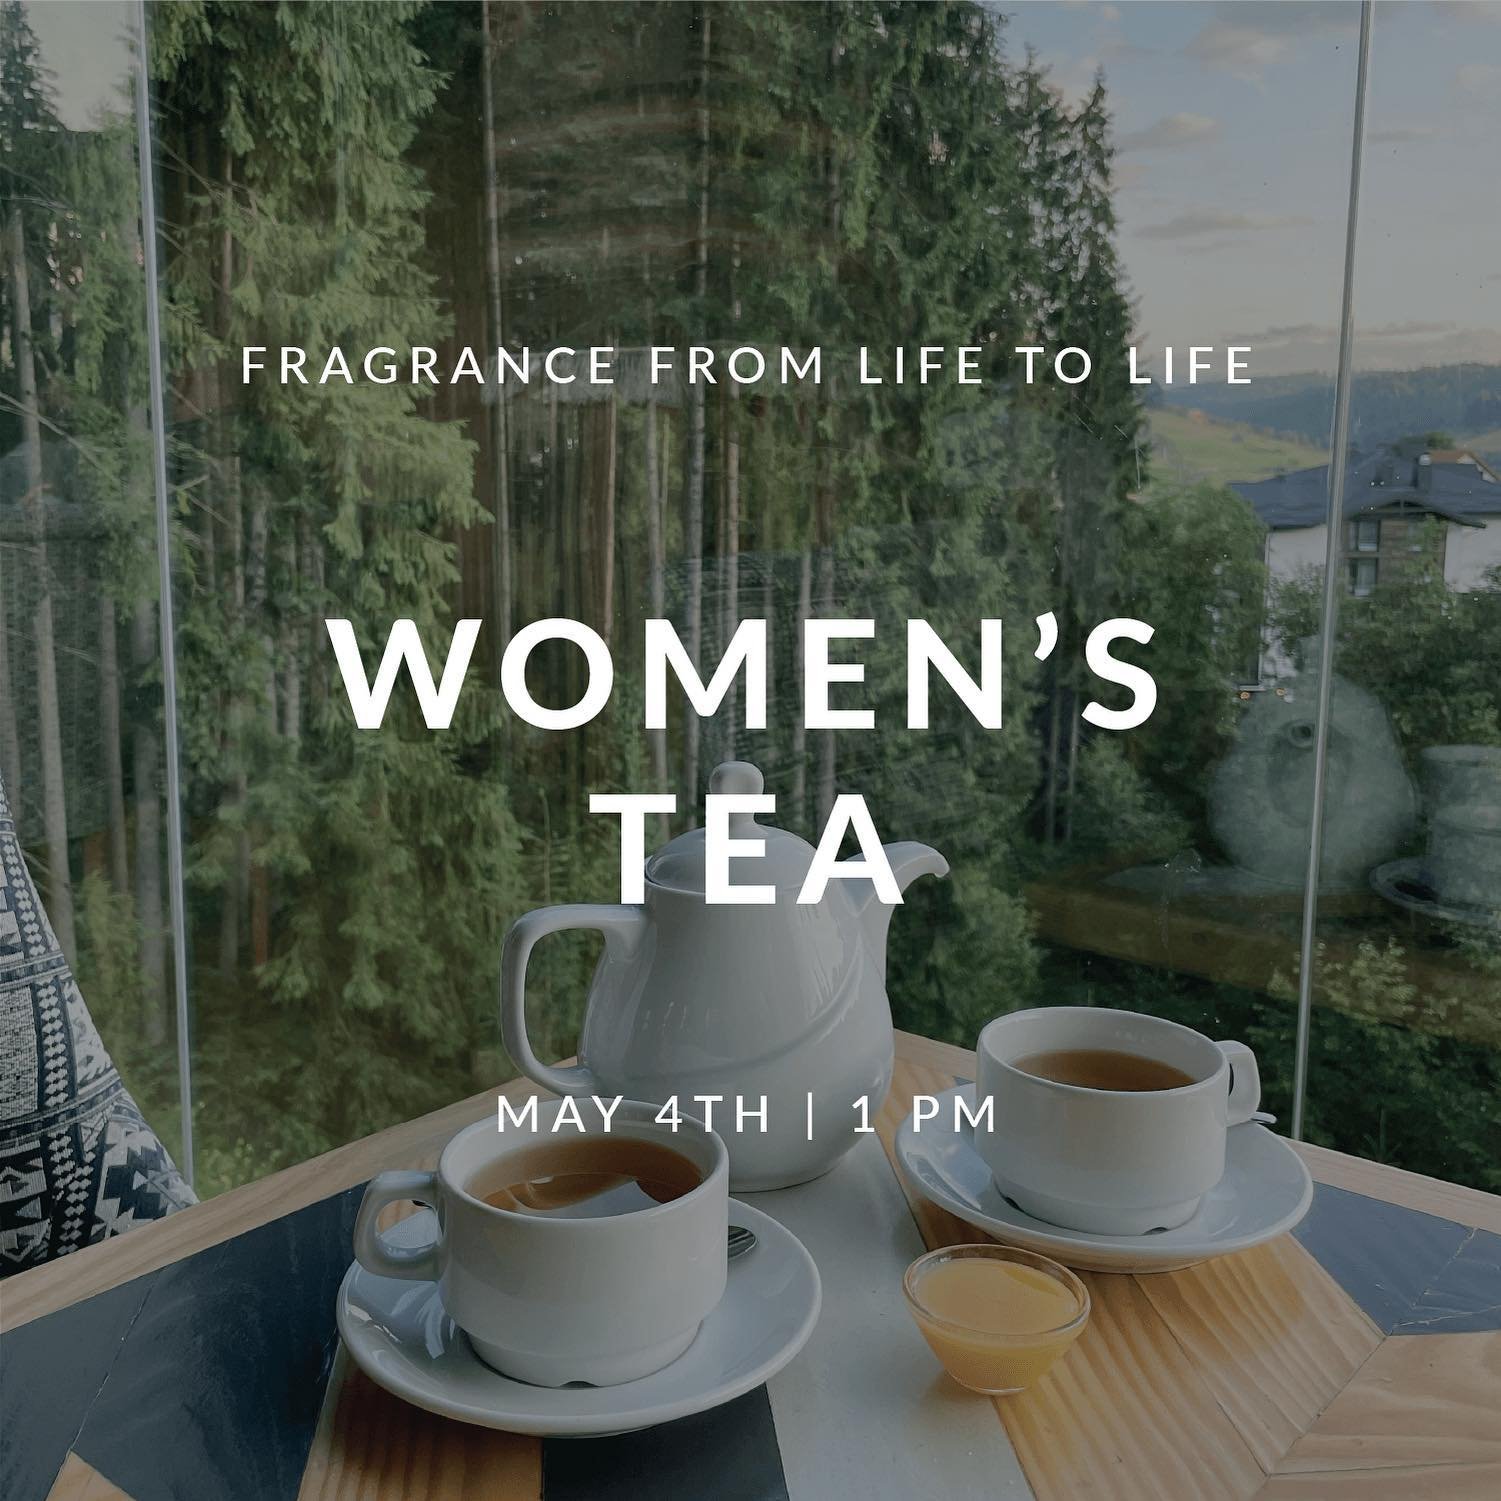 ages 8+ are welcome! join the ladies for a fun afternoon of fellowship!

🌸shade is limited, so bring a hat!
🌸bring a tea snack to share!
🌸rsvp to diana@fahrney.com!

hope to see you there!!❤️